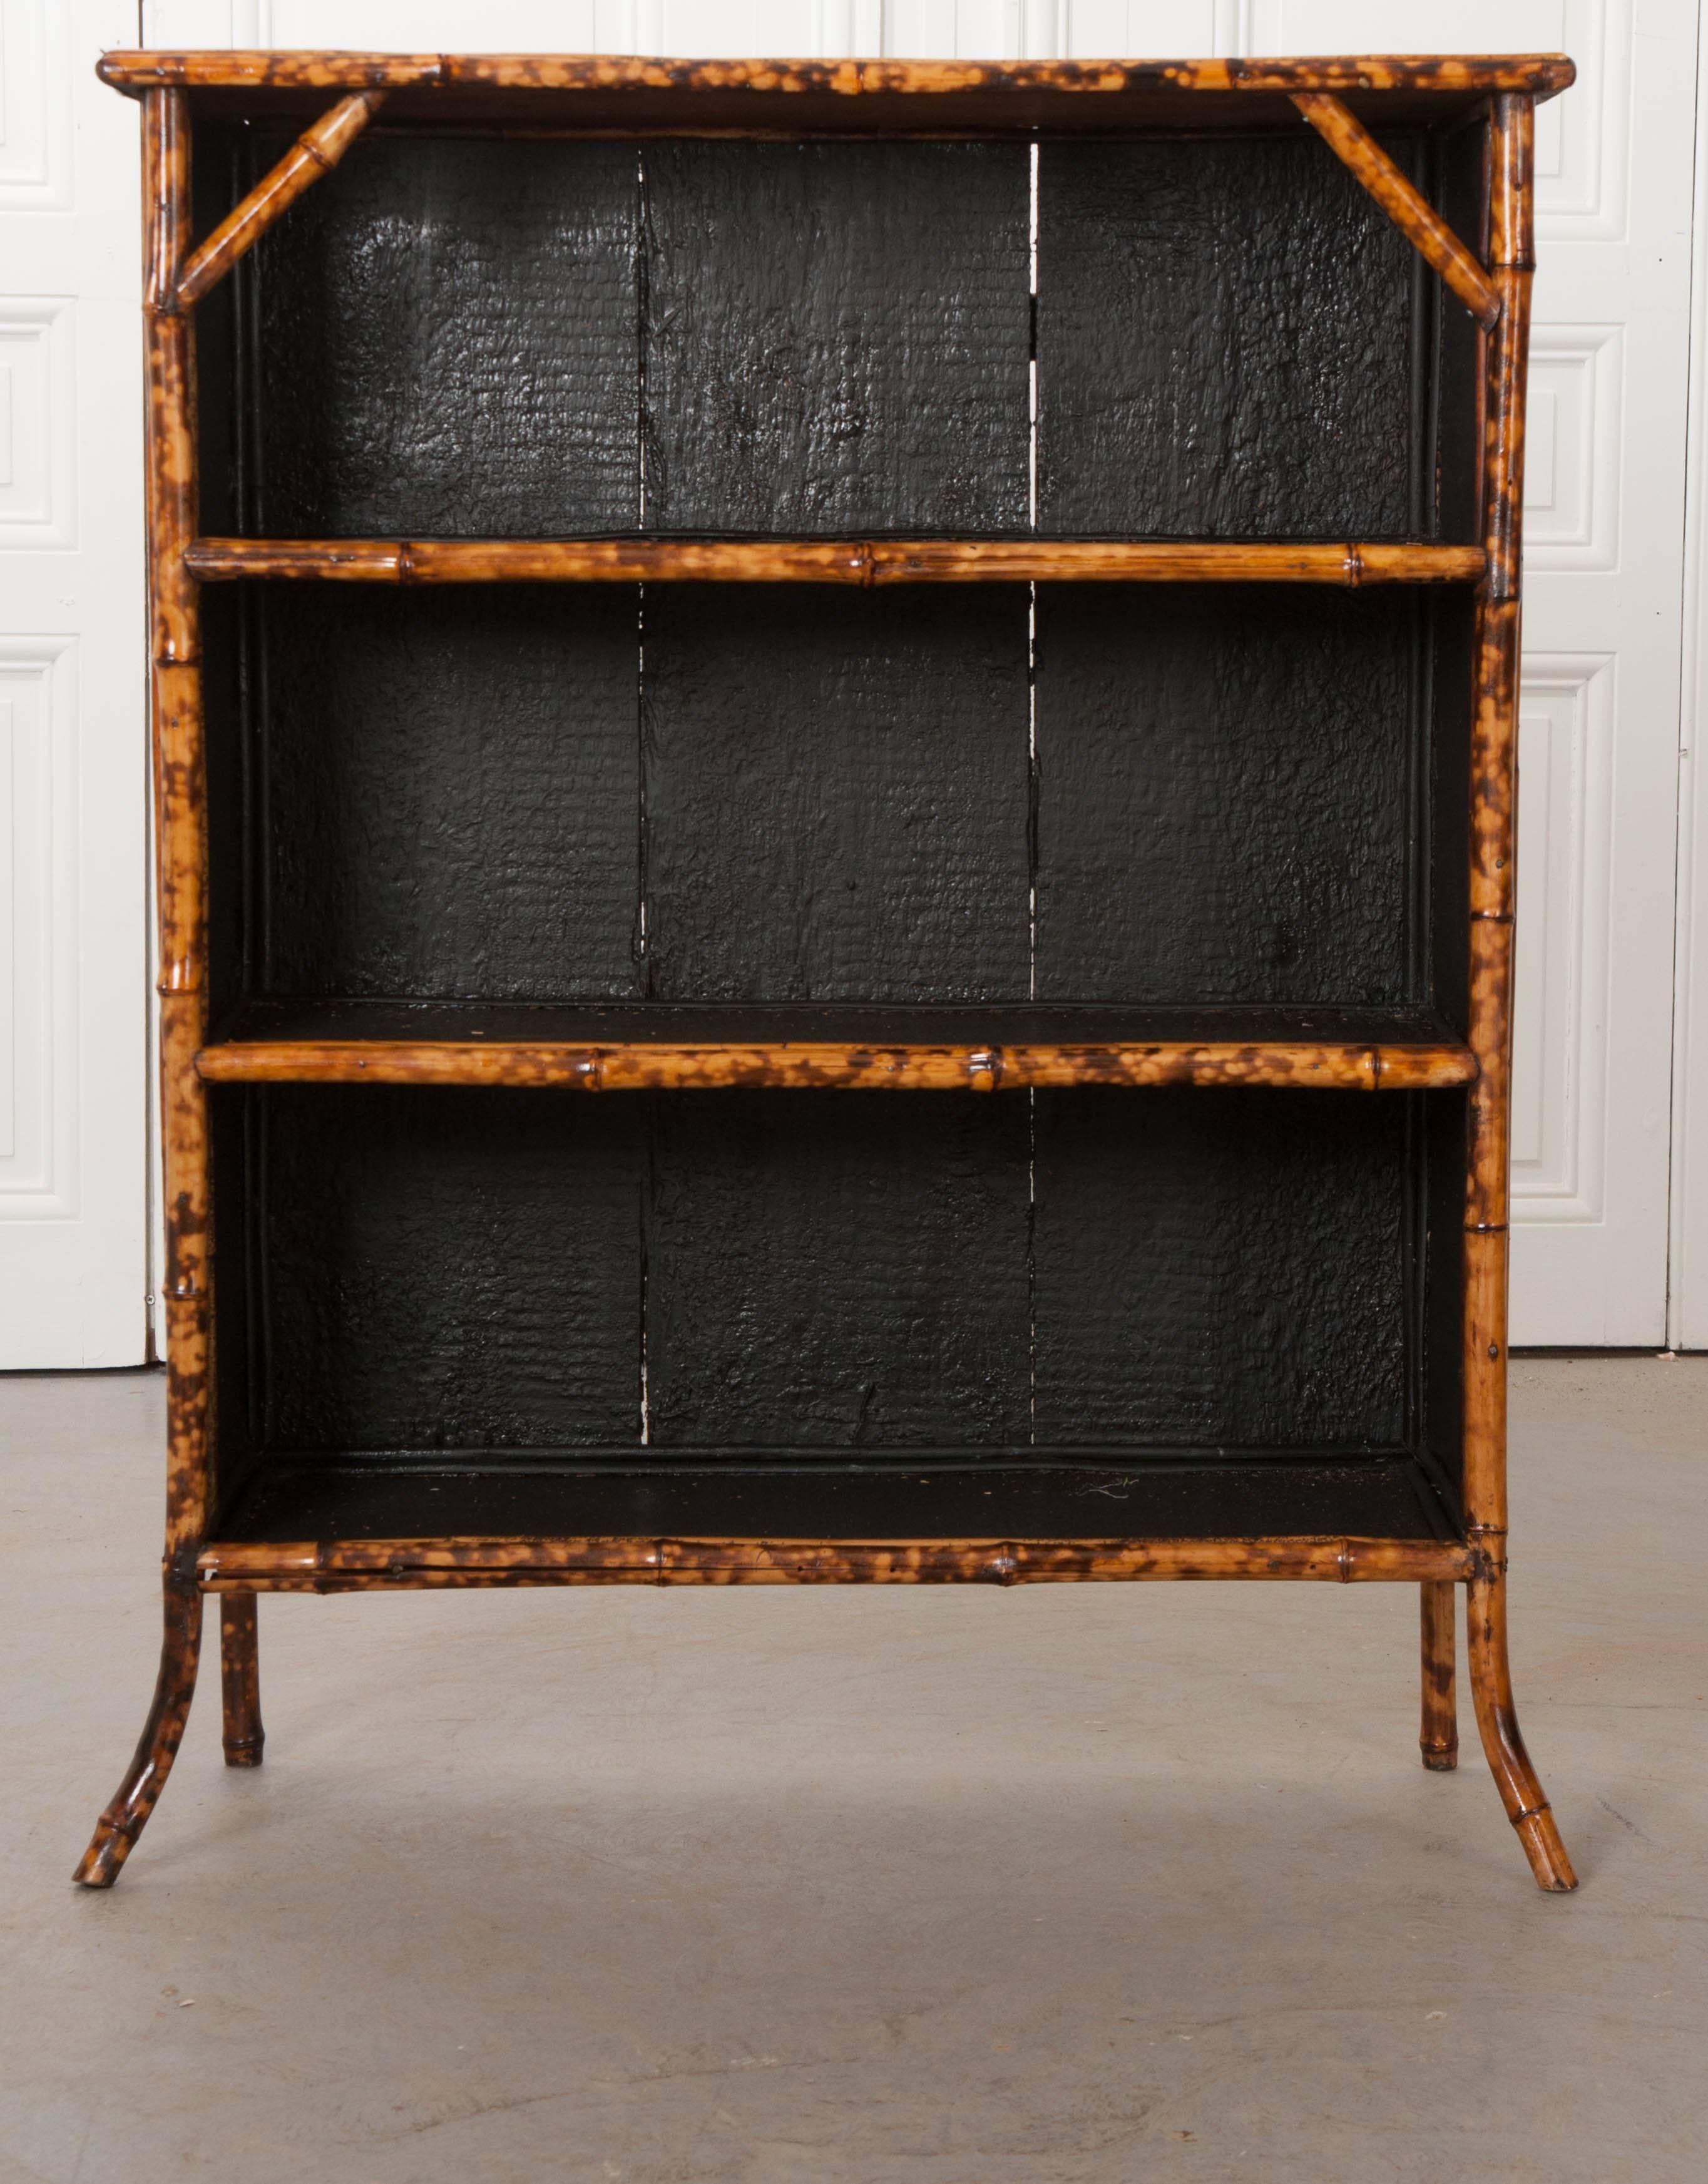 An antique English bamboo bookshelf from the 1890s, that has been recently refinished. Where you see black and découpage is where seagrass would have been. Over time, the seagrass has been damaged and recently replaced with this fabulous fish